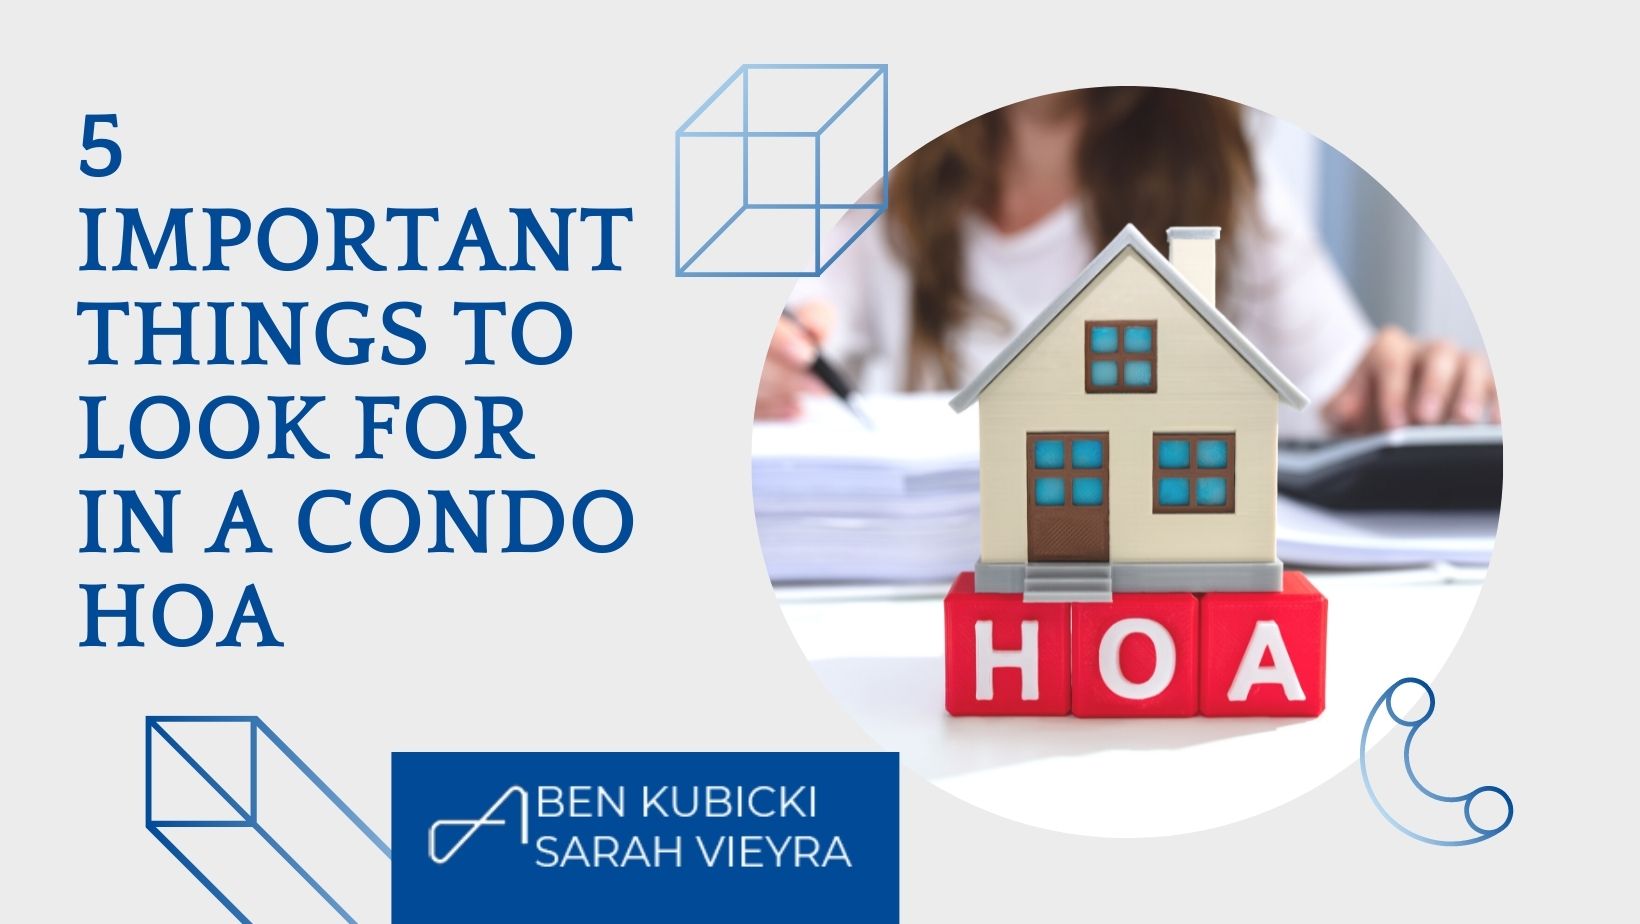 5 Important Things to Look for in a Condo HOA